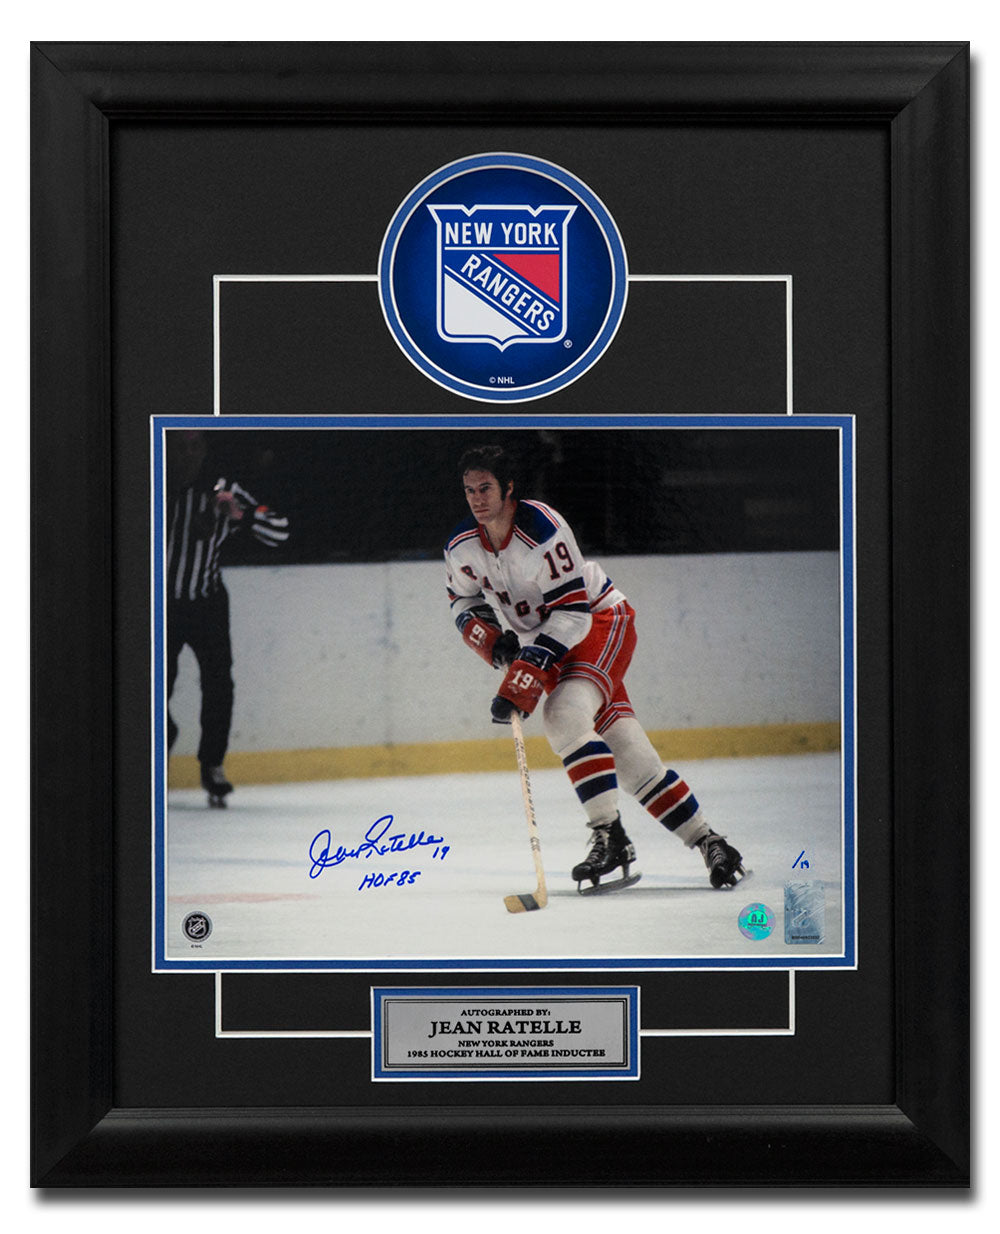 Jean Ratelle New York Rangers Autographed Large Logo 20x24 Frame #/19